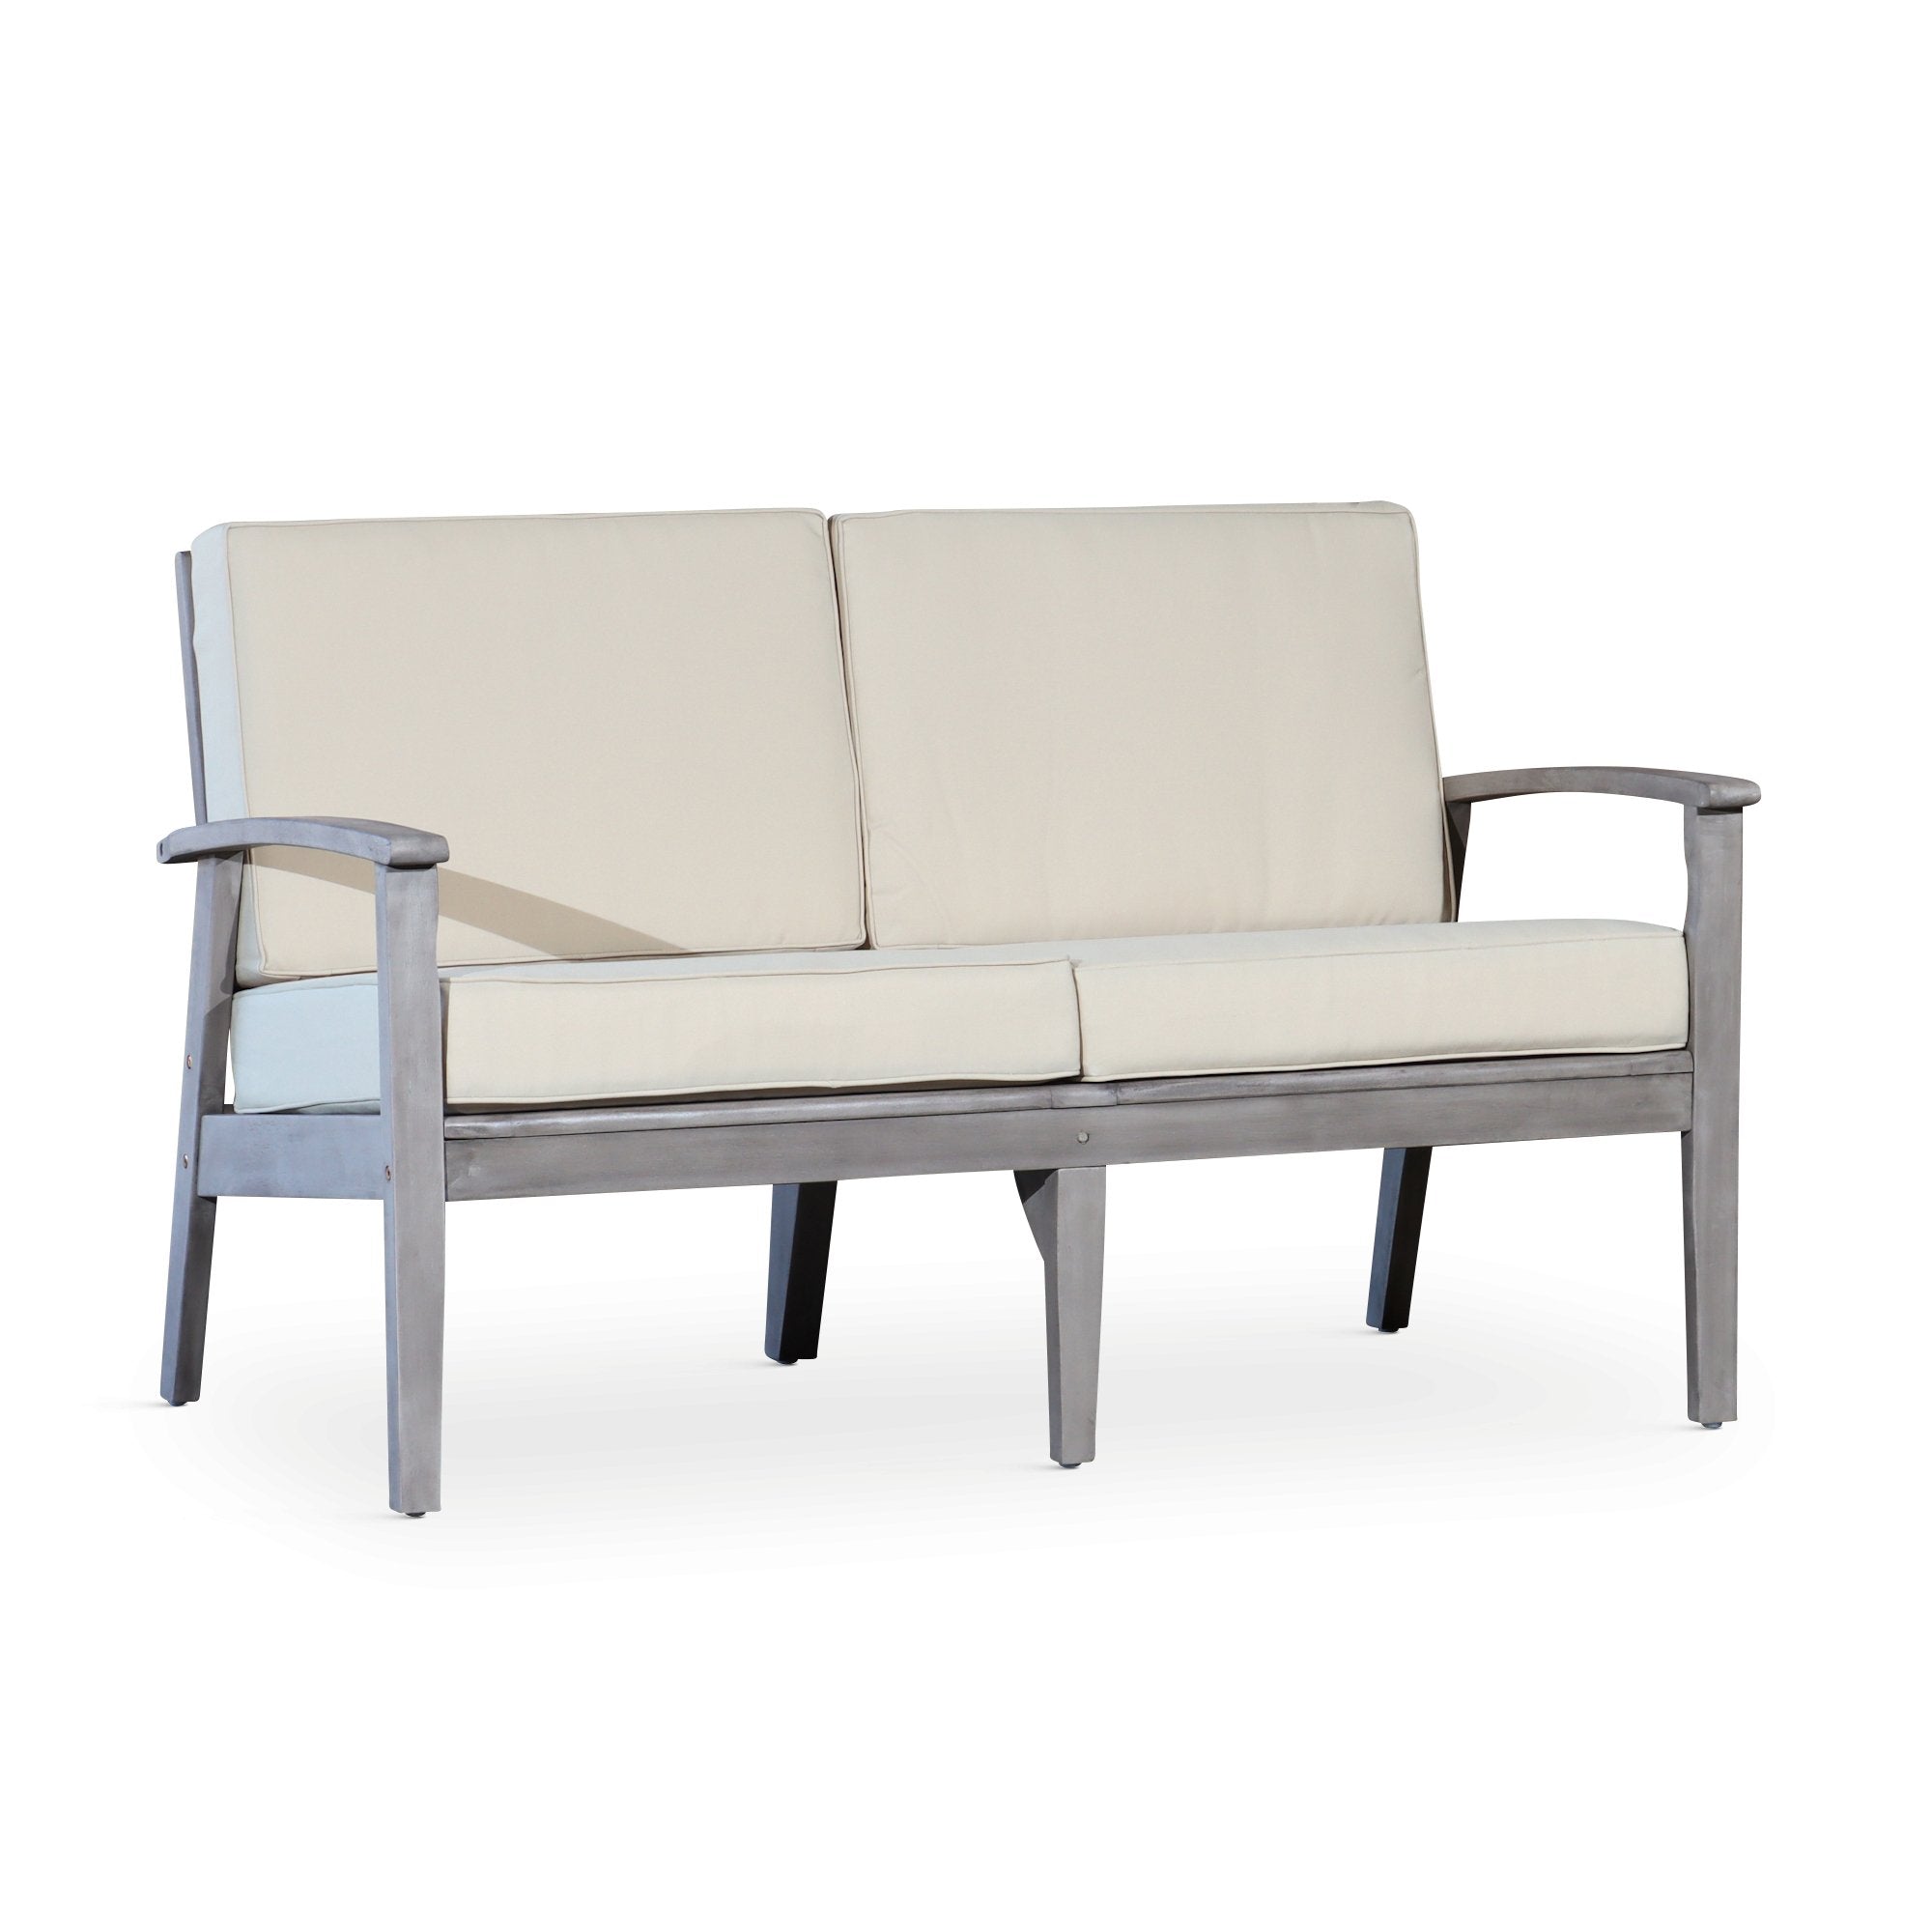 Outdoor-Loveseat-with-Cushions,-Silver-Gray-Finish,-Sand-Cushions-Outdoor-Chairs